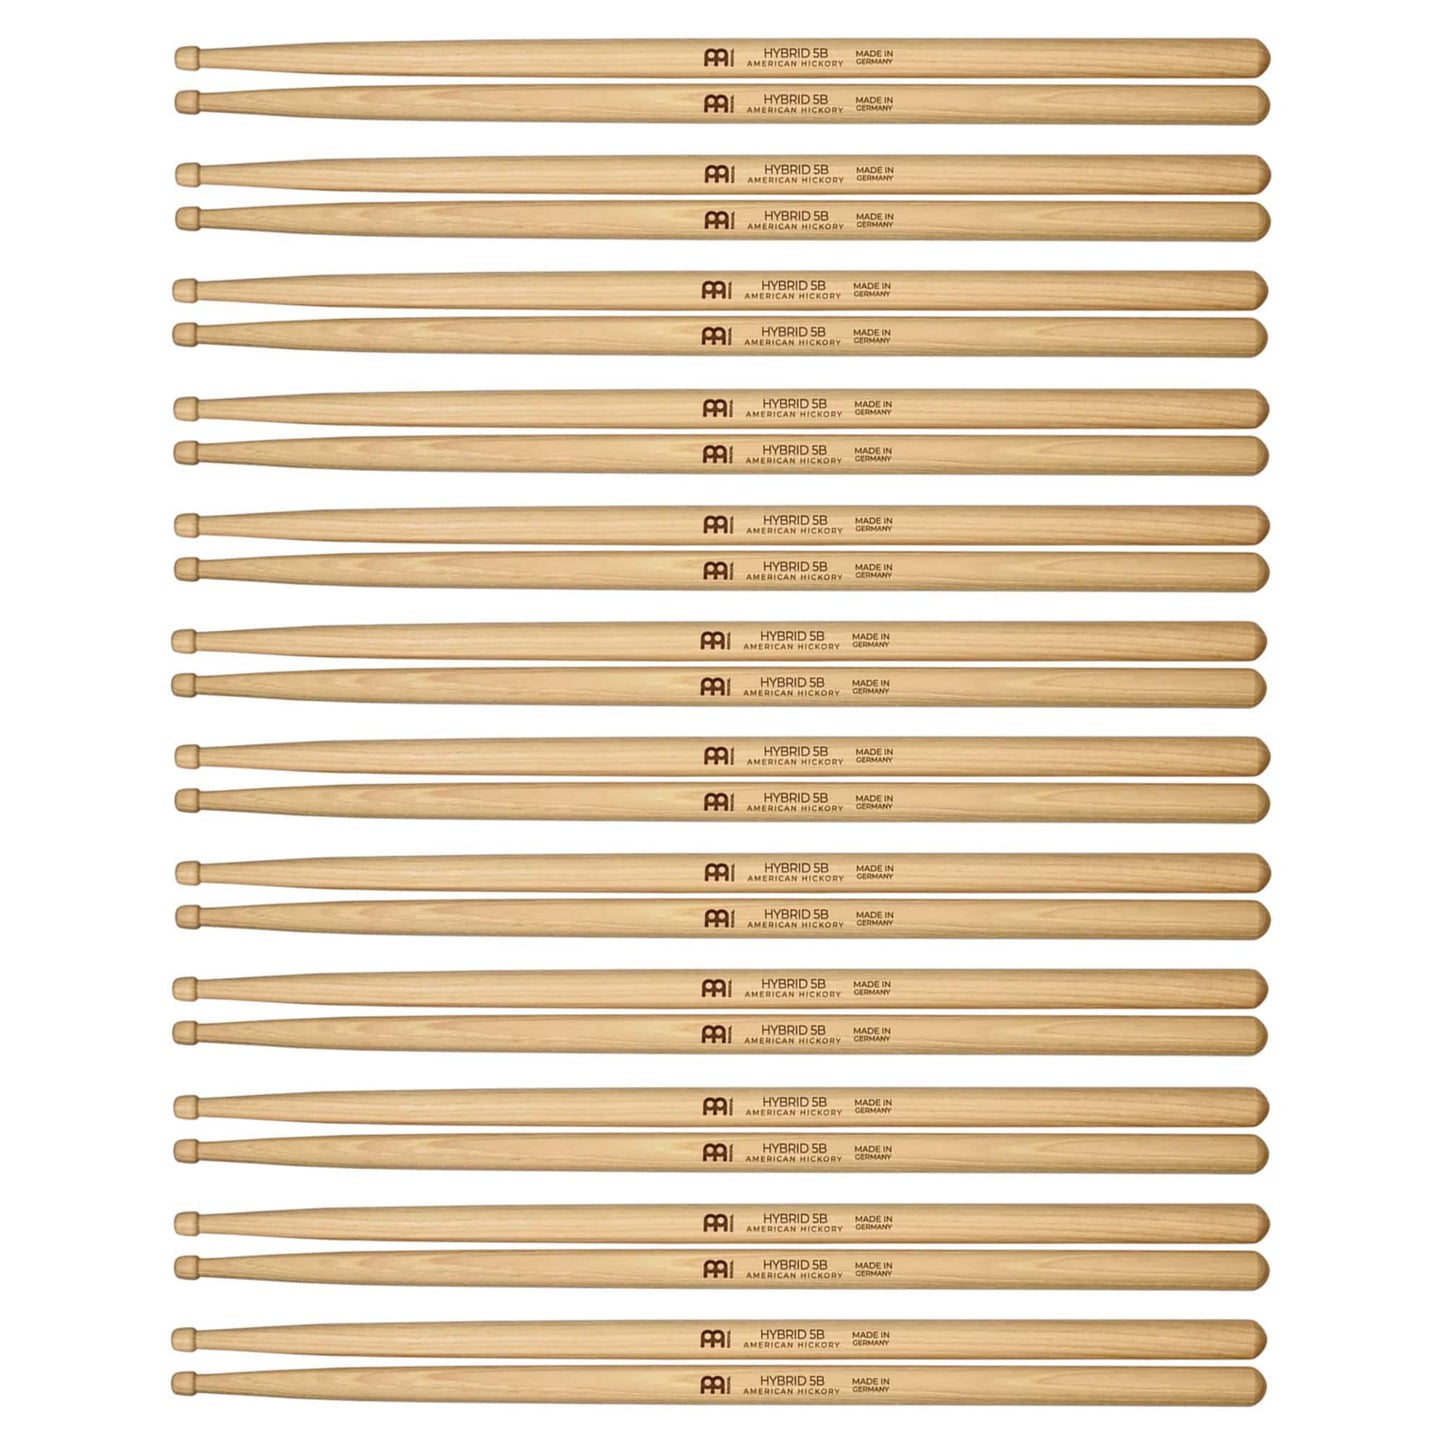 Meinl Hybrid 5B Wood Tip Drum Sticks (12 Pair Bundle) Drums and Percussion / Parts and Accessories / Drum Sticks and Mallets